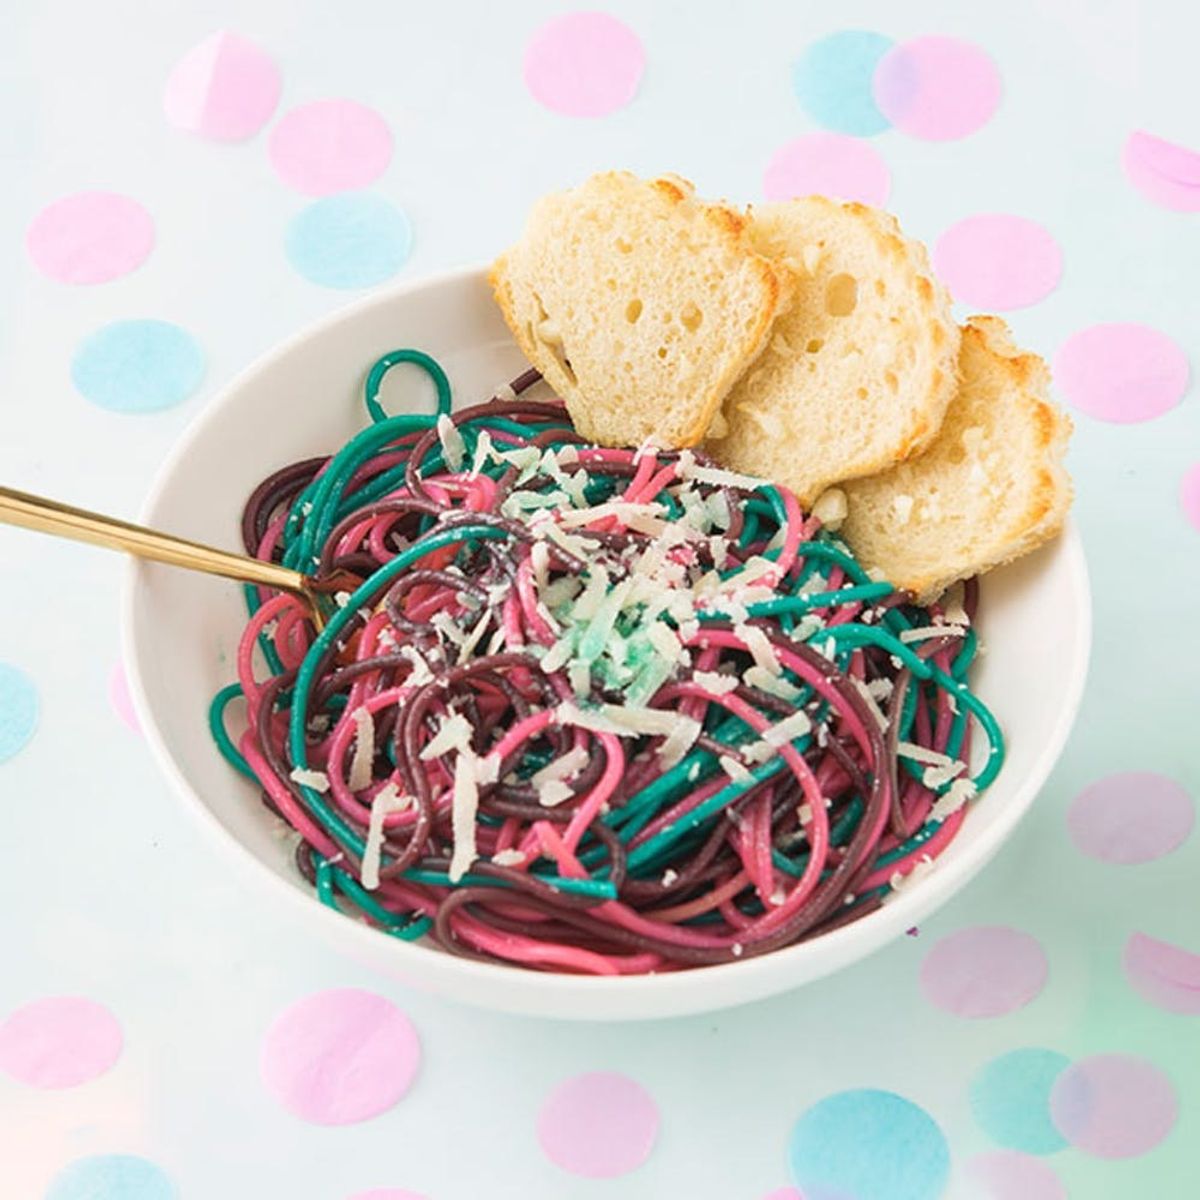 Serve Your Squad Mermaid Pasta to Fulfill Everyone’s Mermaid Dreams